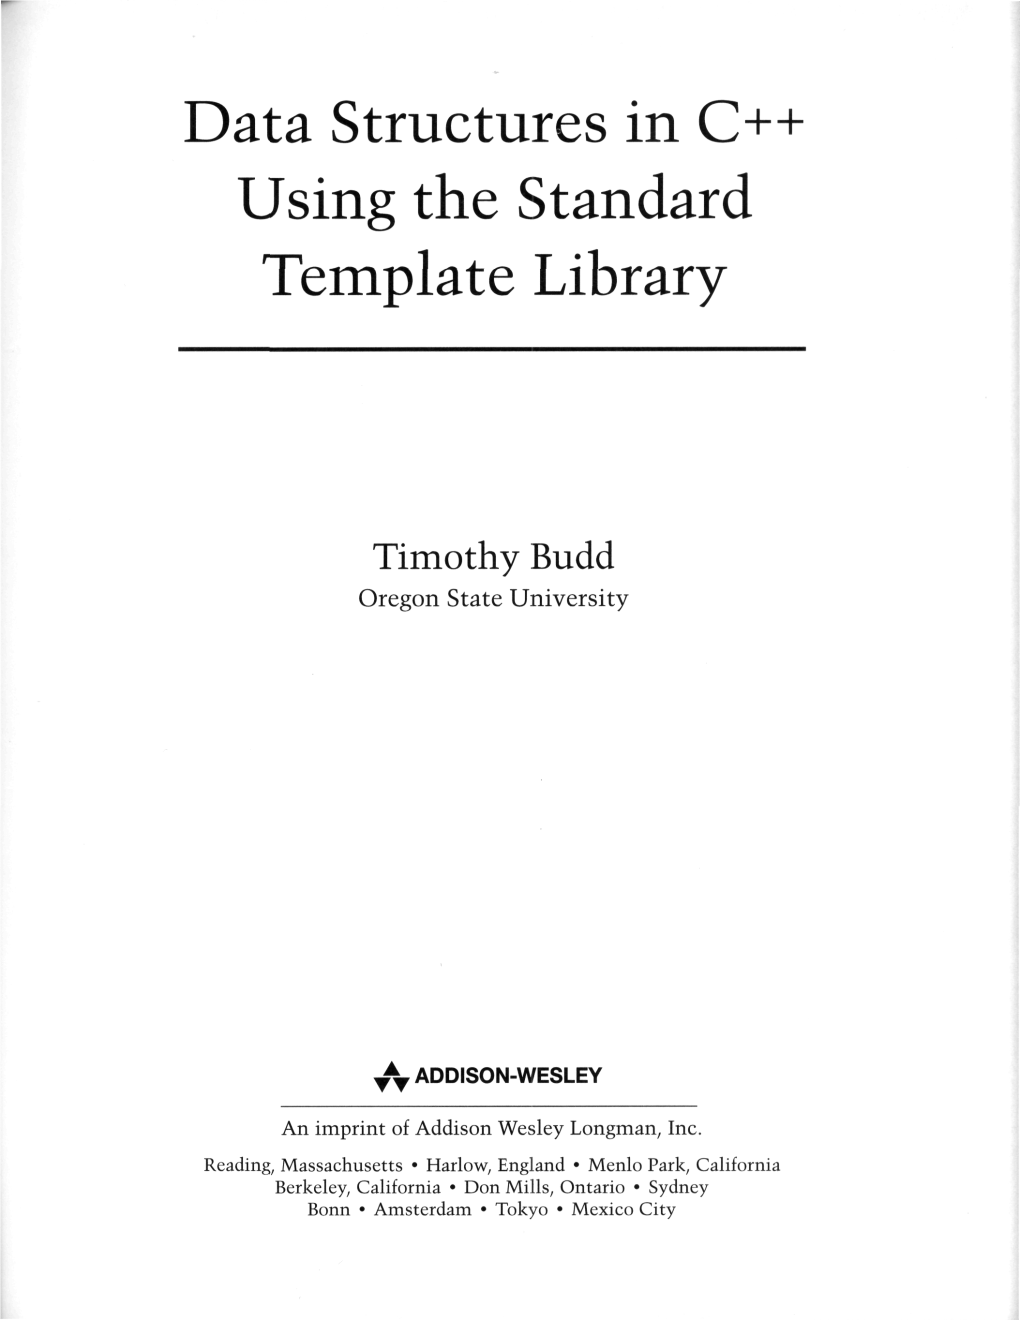 Data Structures in C++ Using the Standard Template Library